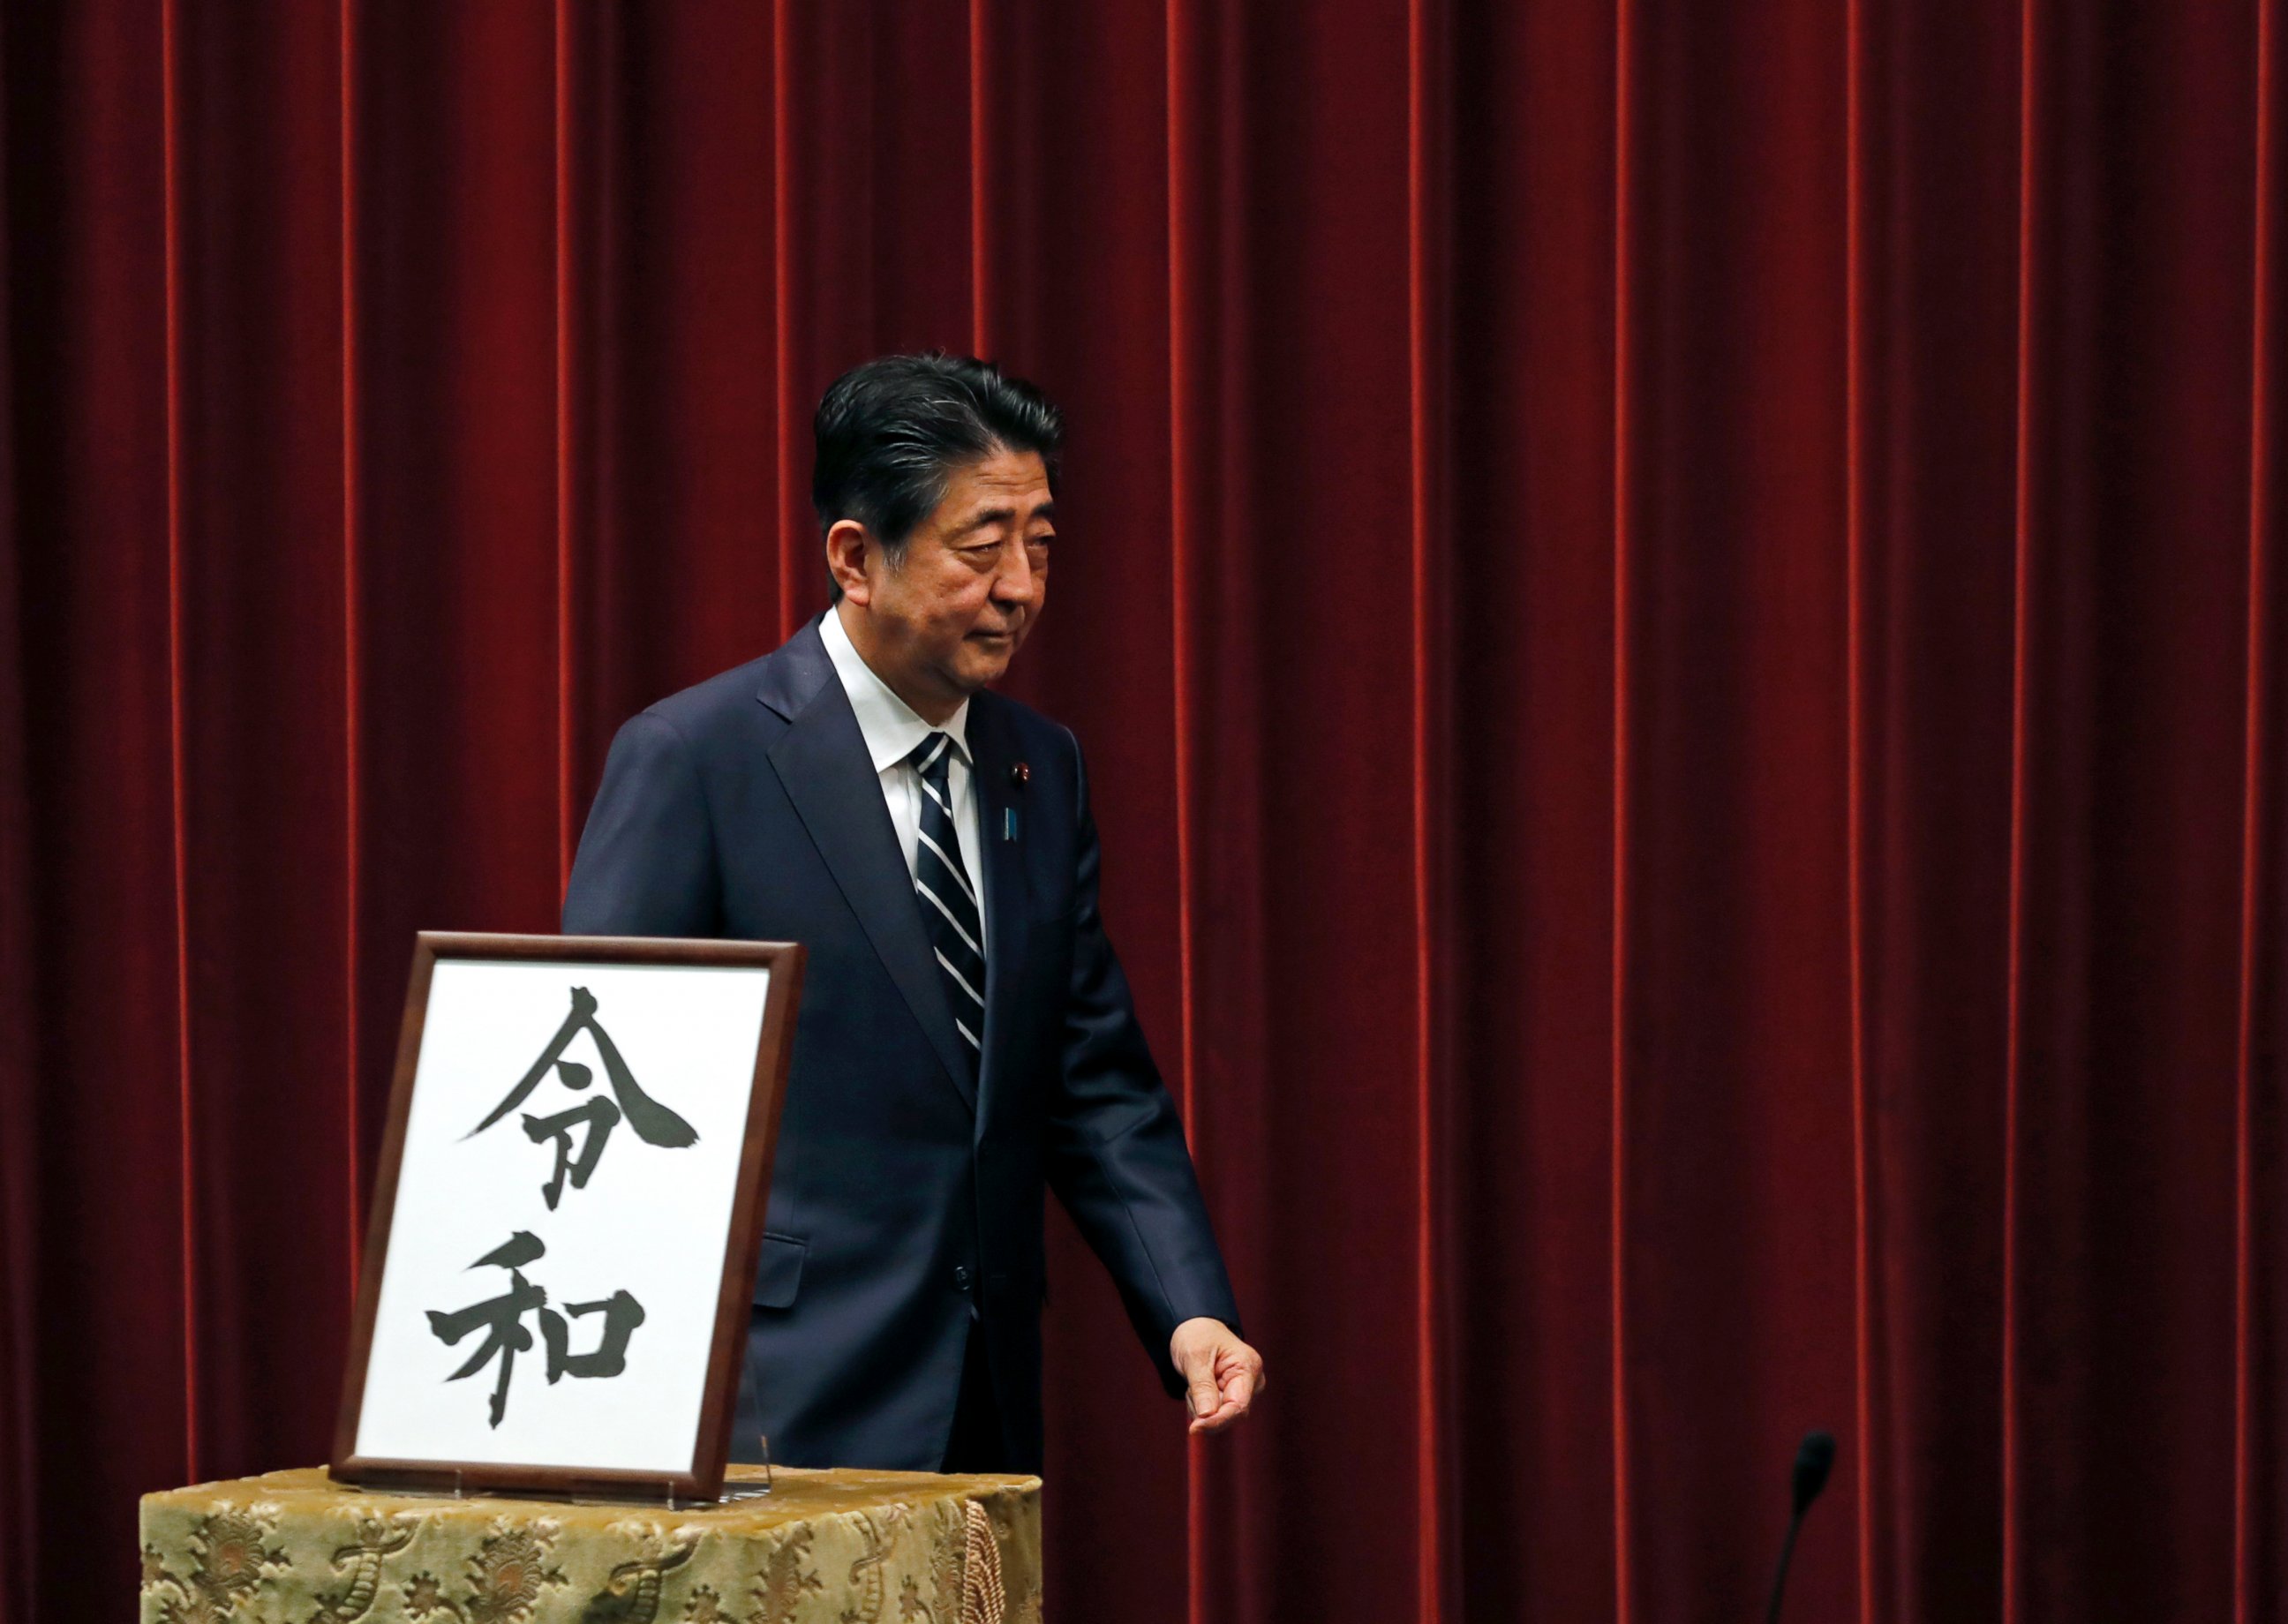 PHOTO: Japanese Prime Minister Shinzo Abe walks past the name of new era "Reiwa" on display at the Prime Minister's office in Tokyo, Monday, April 1, 2019.